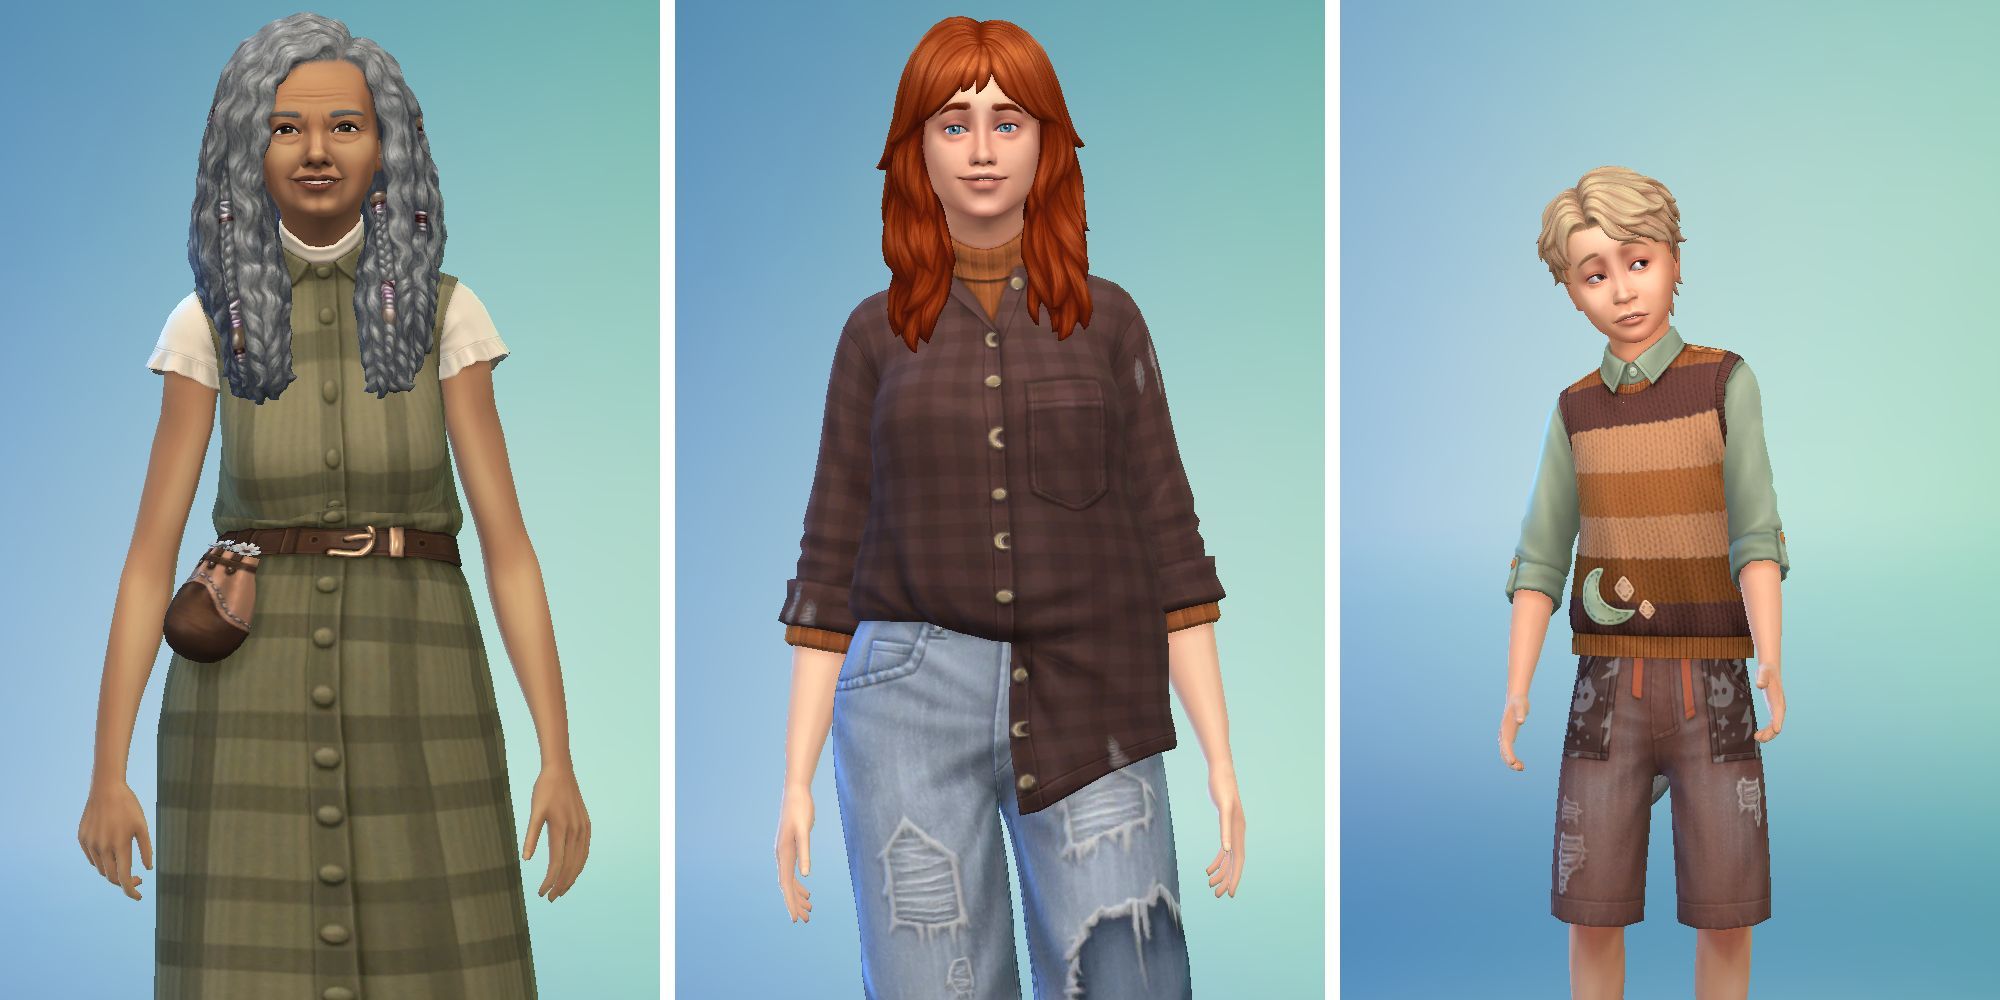 Three images of Sims in Sims 4 Create A Sim. An elder in a green dress, a Sim in a brown plaid shirt, and a child in a sweatervest